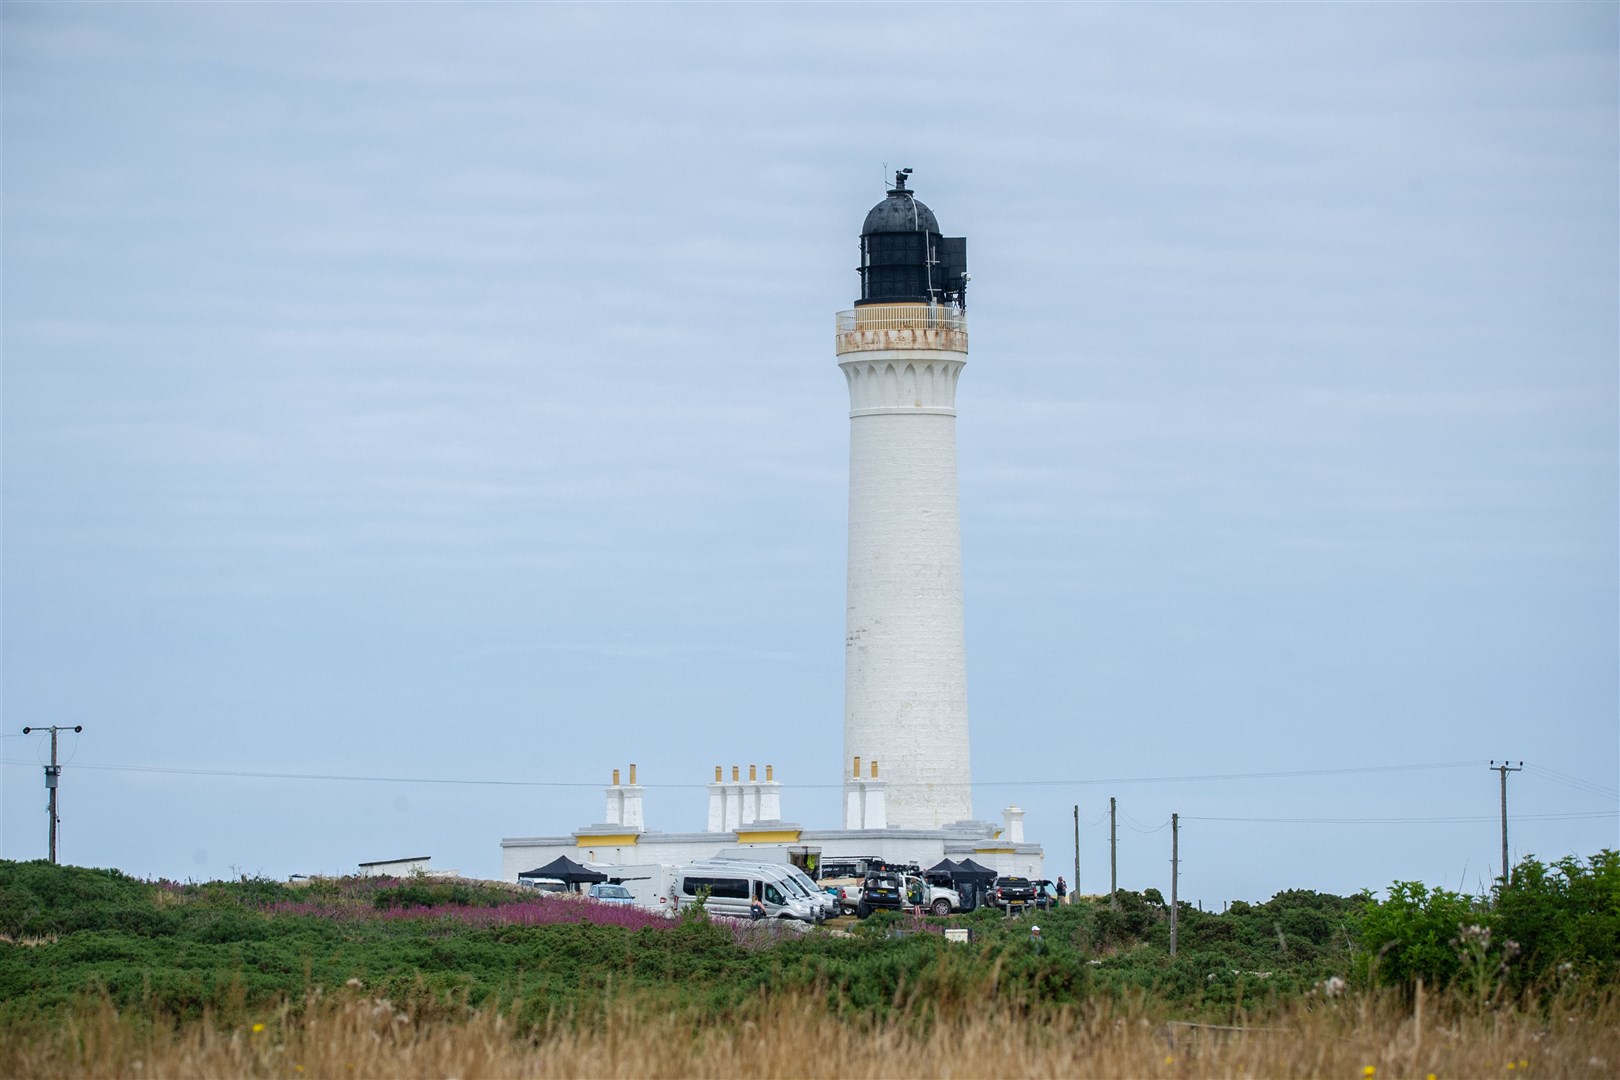 The lighthouse will be lit up for Epilepsy Awareness. Picture: Daniel Forsyth